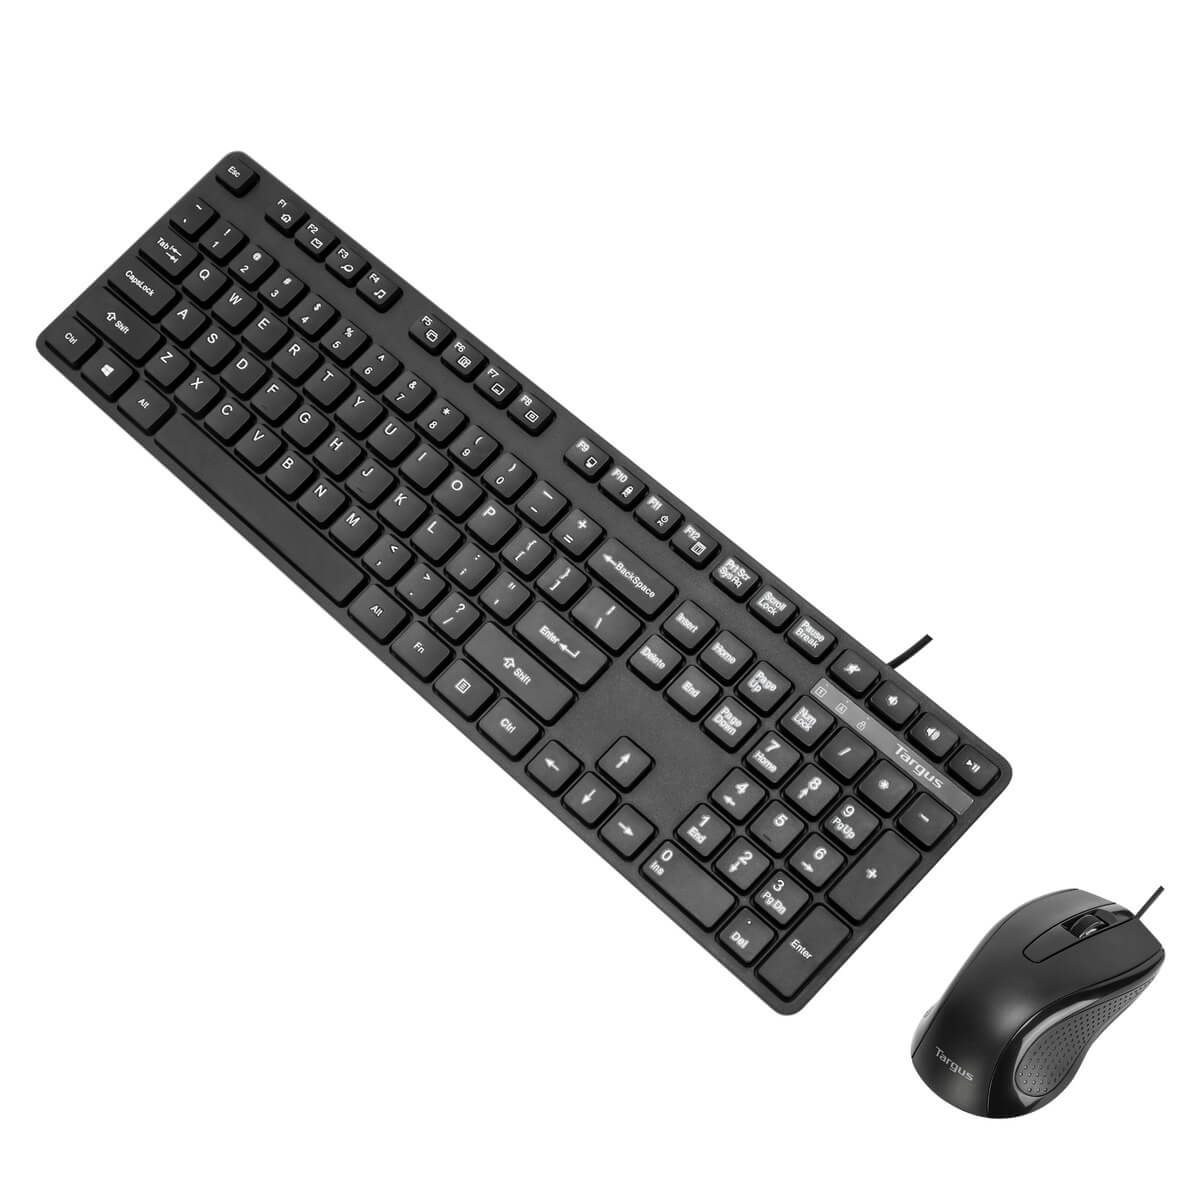 Targus UK Full-size USB Wired Antimicrobial Keyboard (UK) And Full-Size Optical Antimicrobial Wired Mouse Bundle